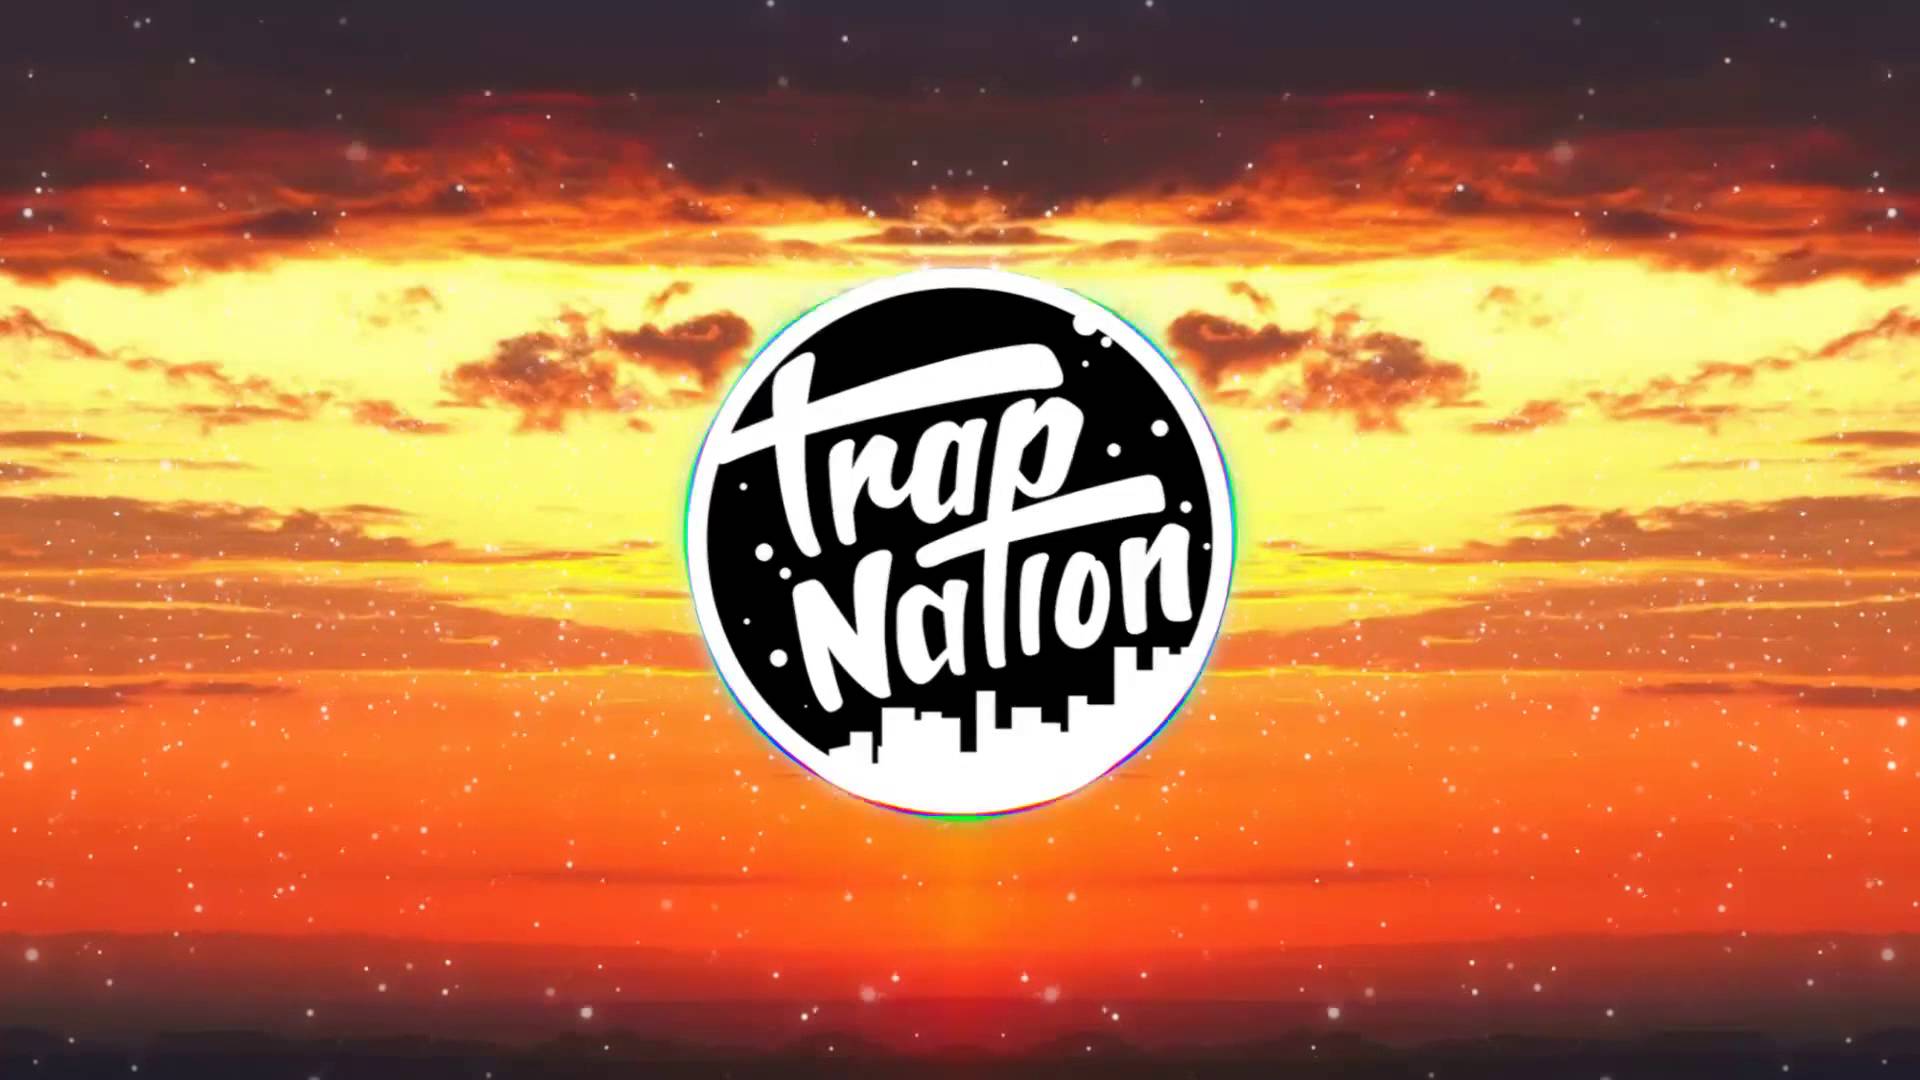 Trap Nation Wallpapers - Wallpaper Cave